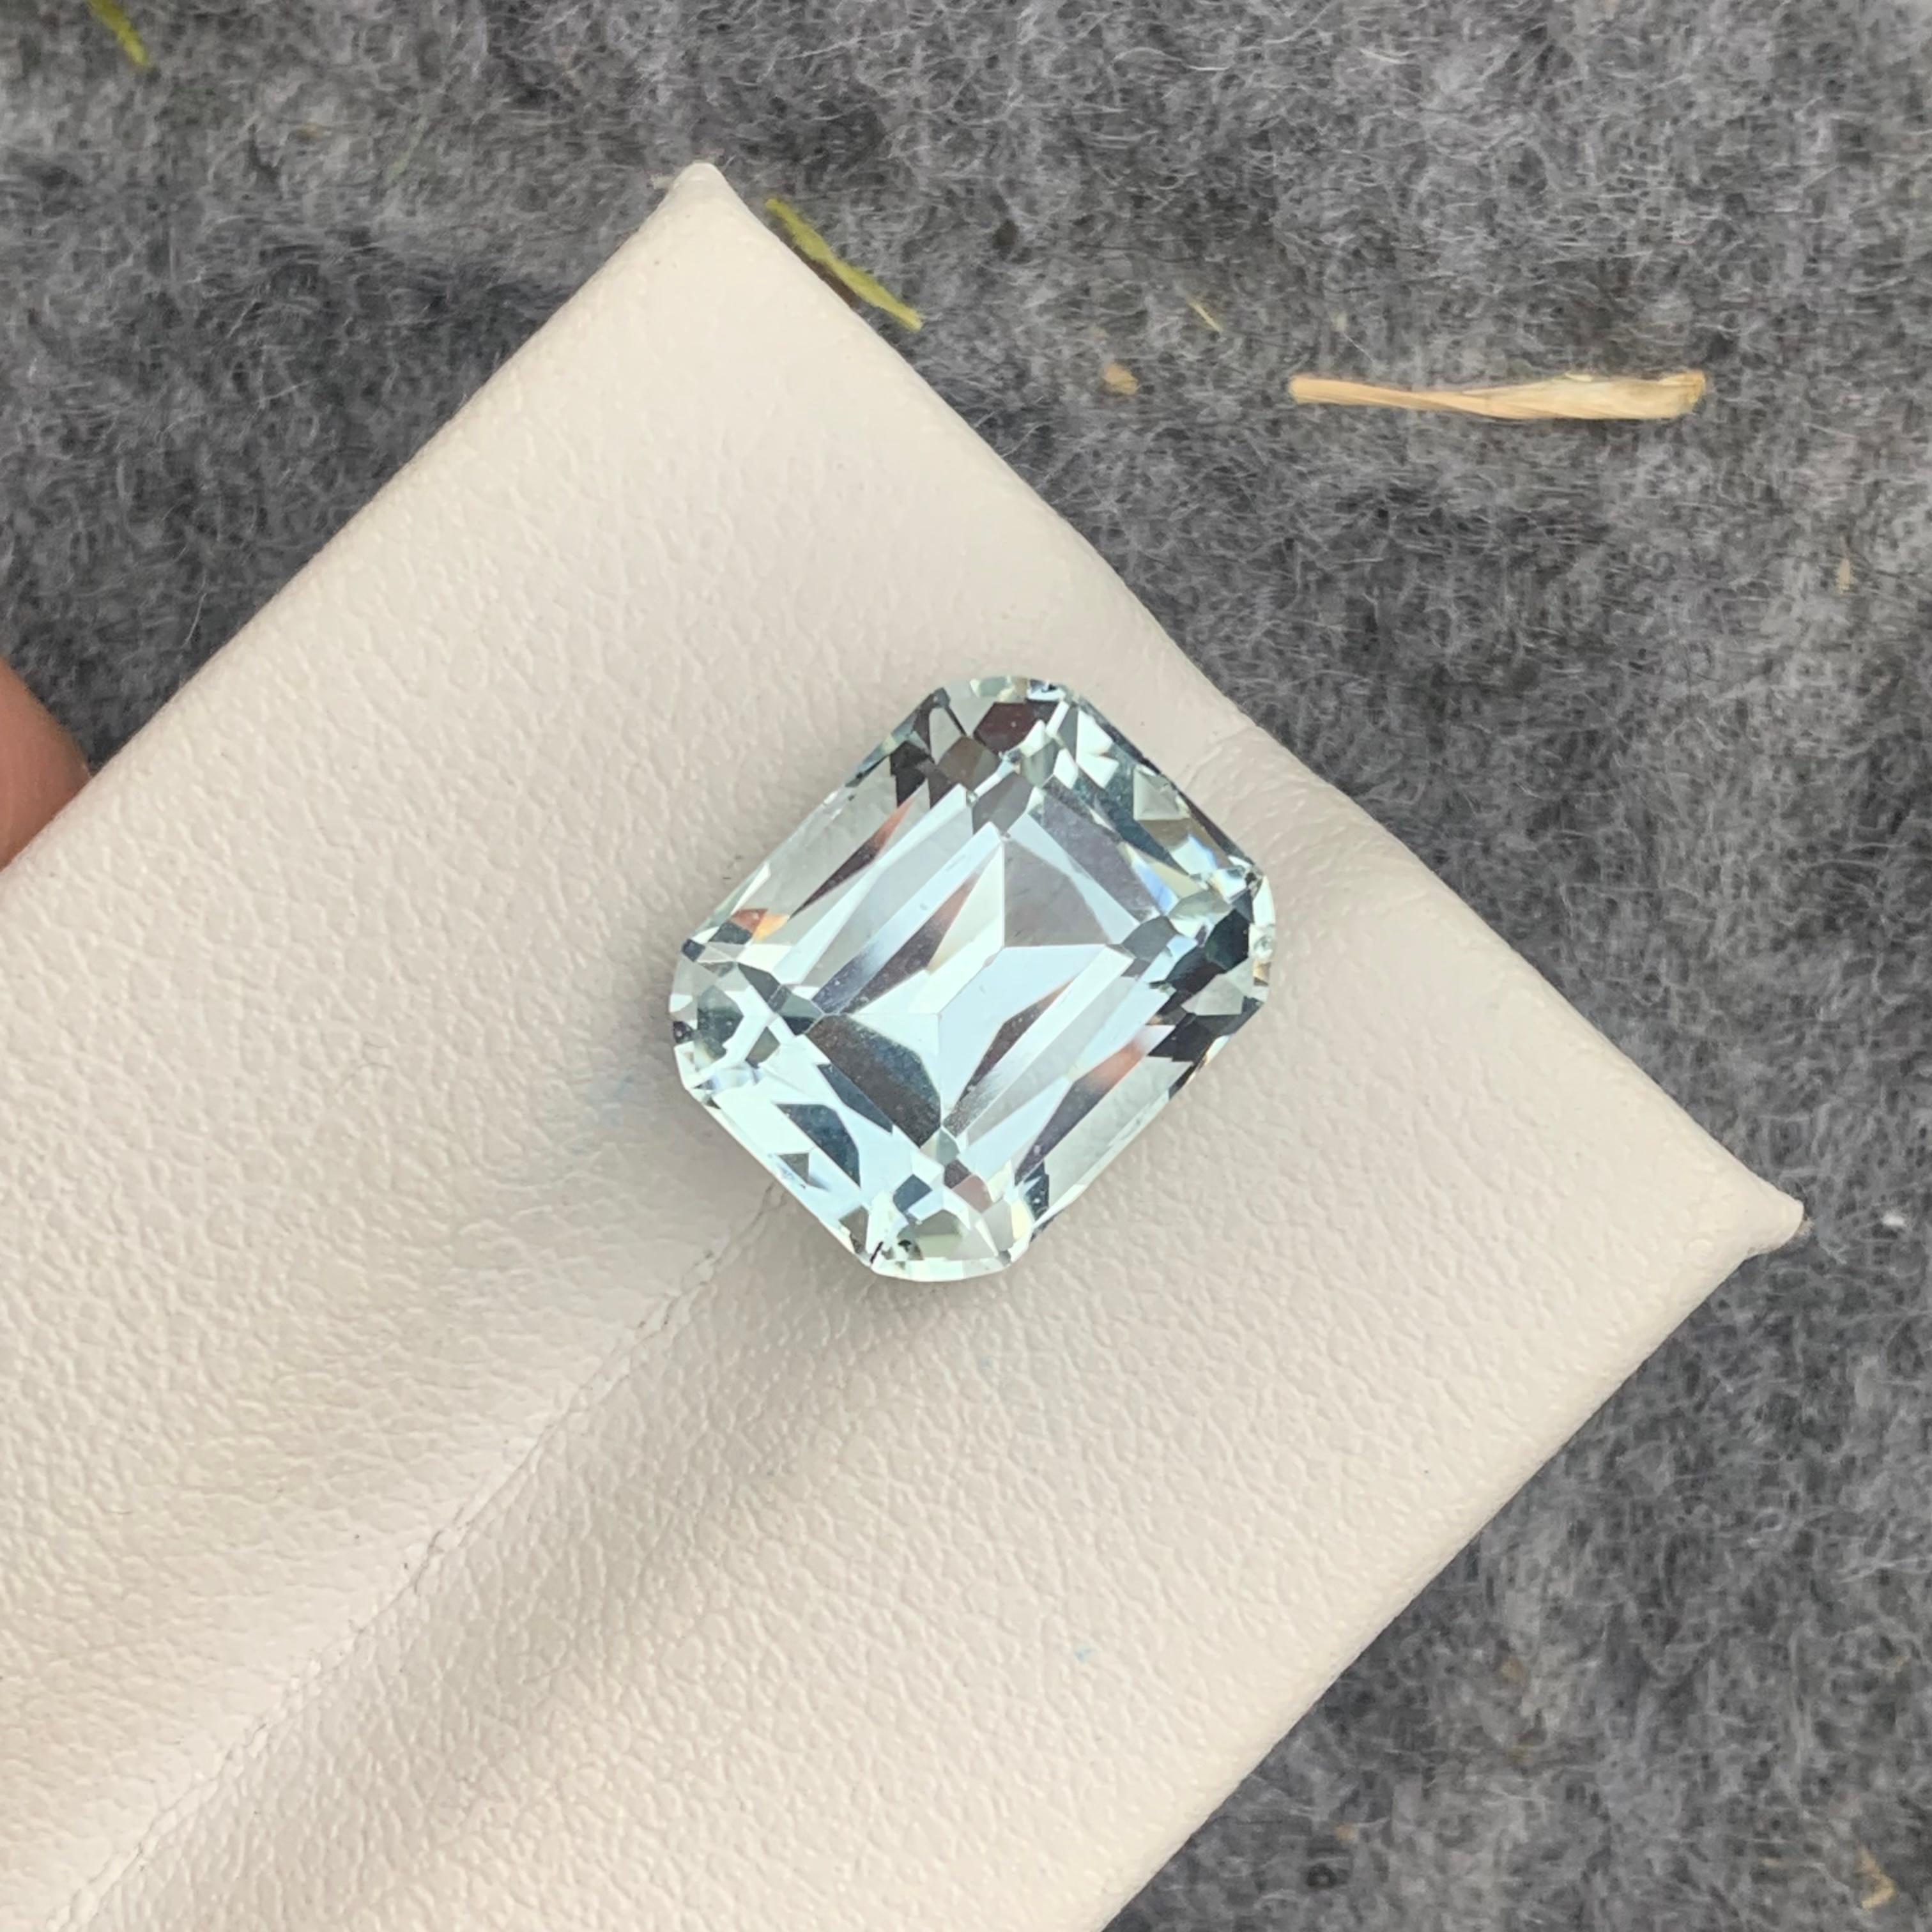 Gemstone Type : Aquamarine
Weight : 6.45 Carats
Dimensions : 11.8x9.8x8.2 mm
Clarity : Eye Clean
Origin : Pakistan
Shape: Cushion
Color: Light Blue
Certificate: On Demand
Birthstone Month: March
It has a shielding effect on your energy field and has